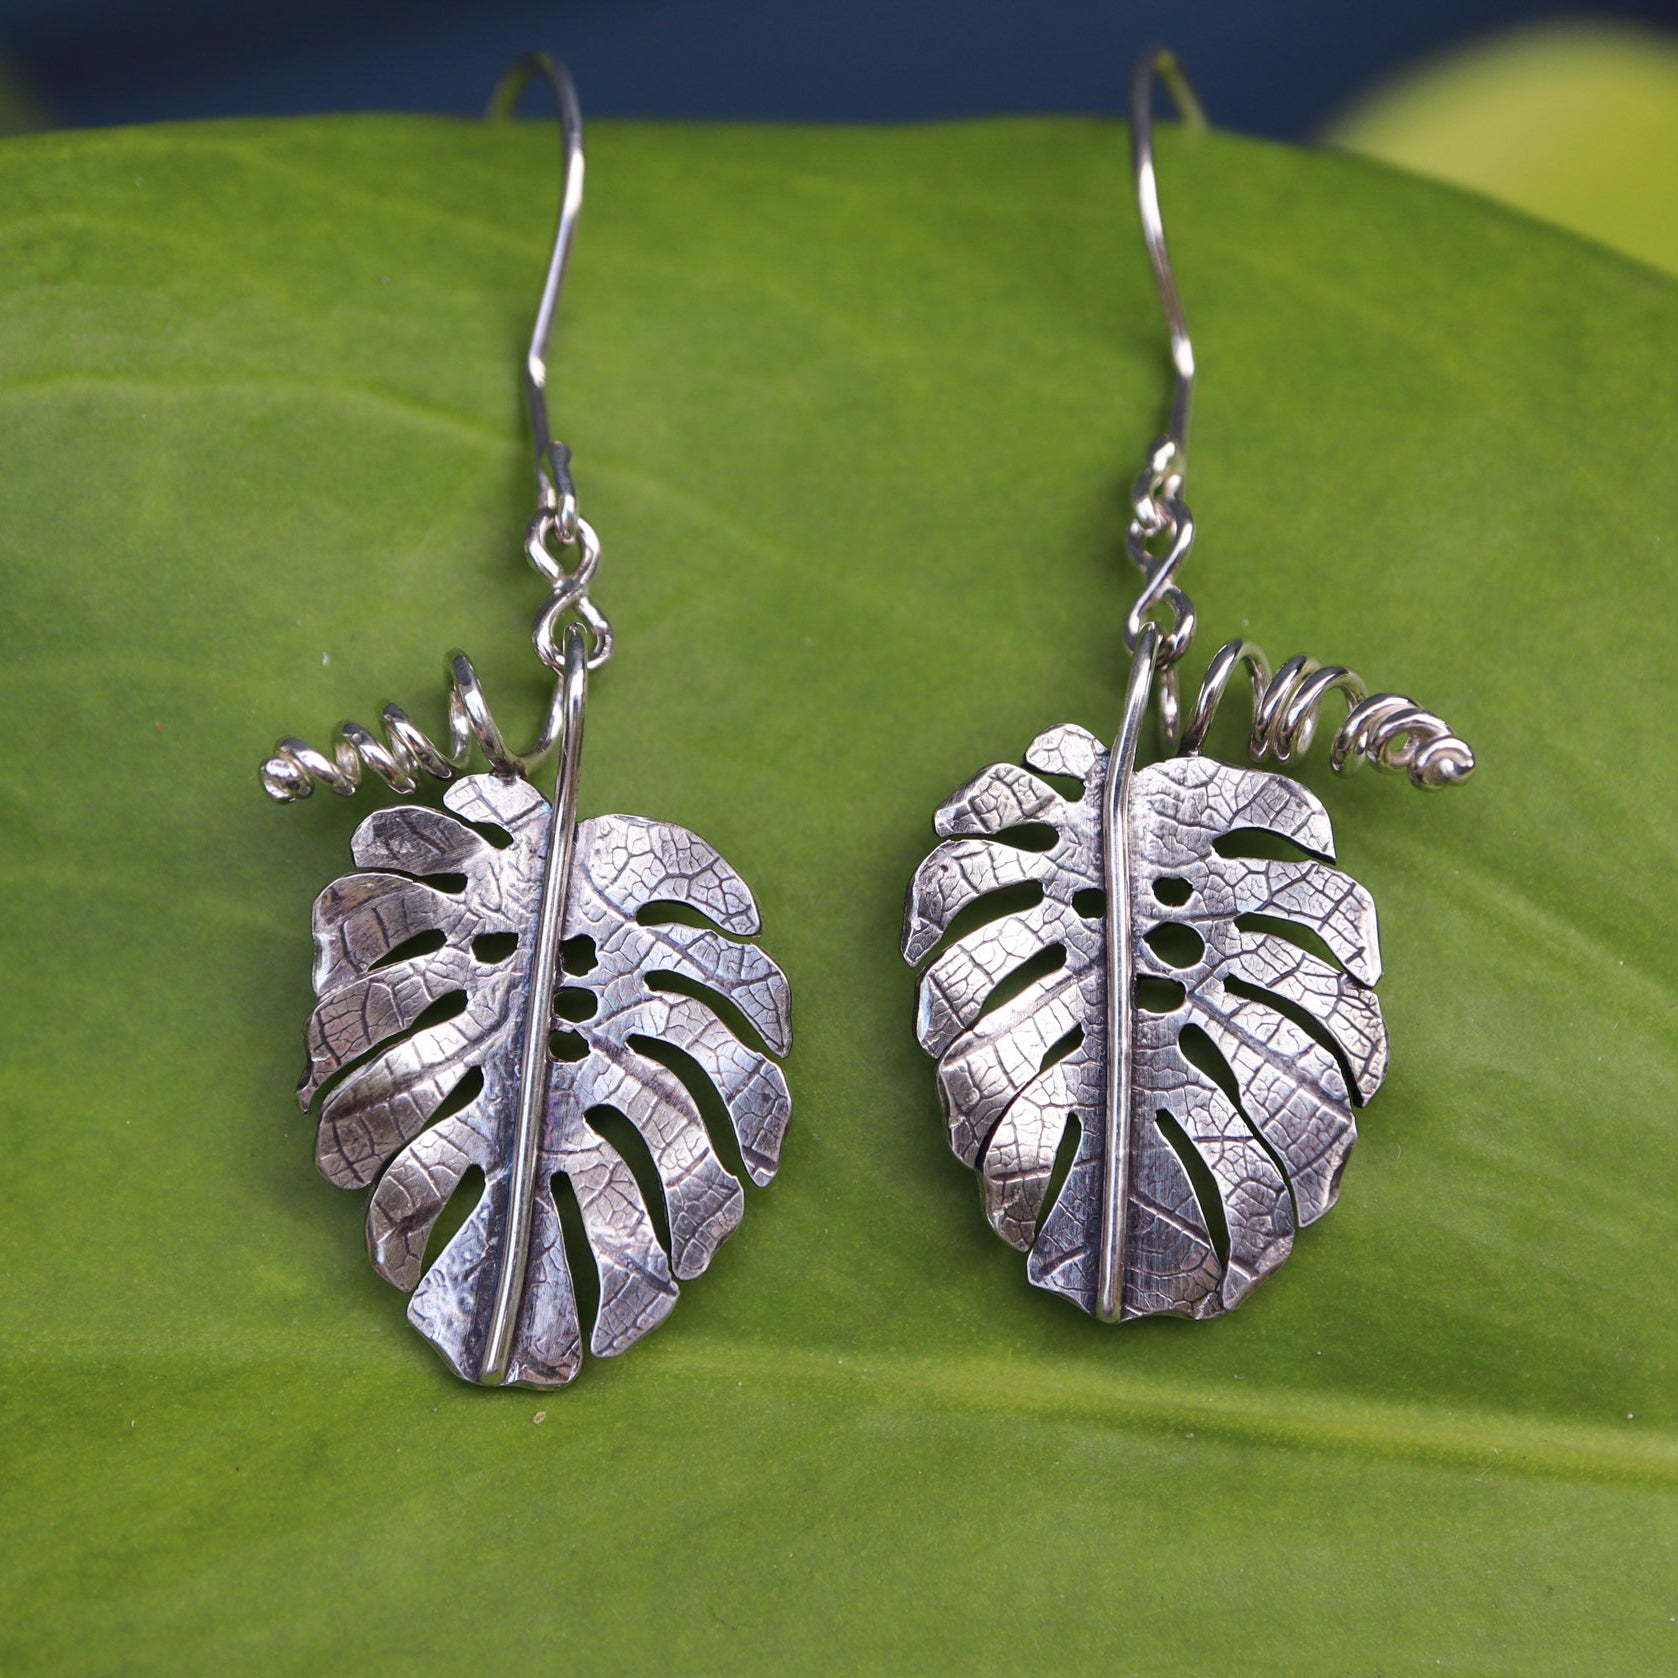 A pair of monstera deliciosa dangle earrings are shown on a light green plant leaf.